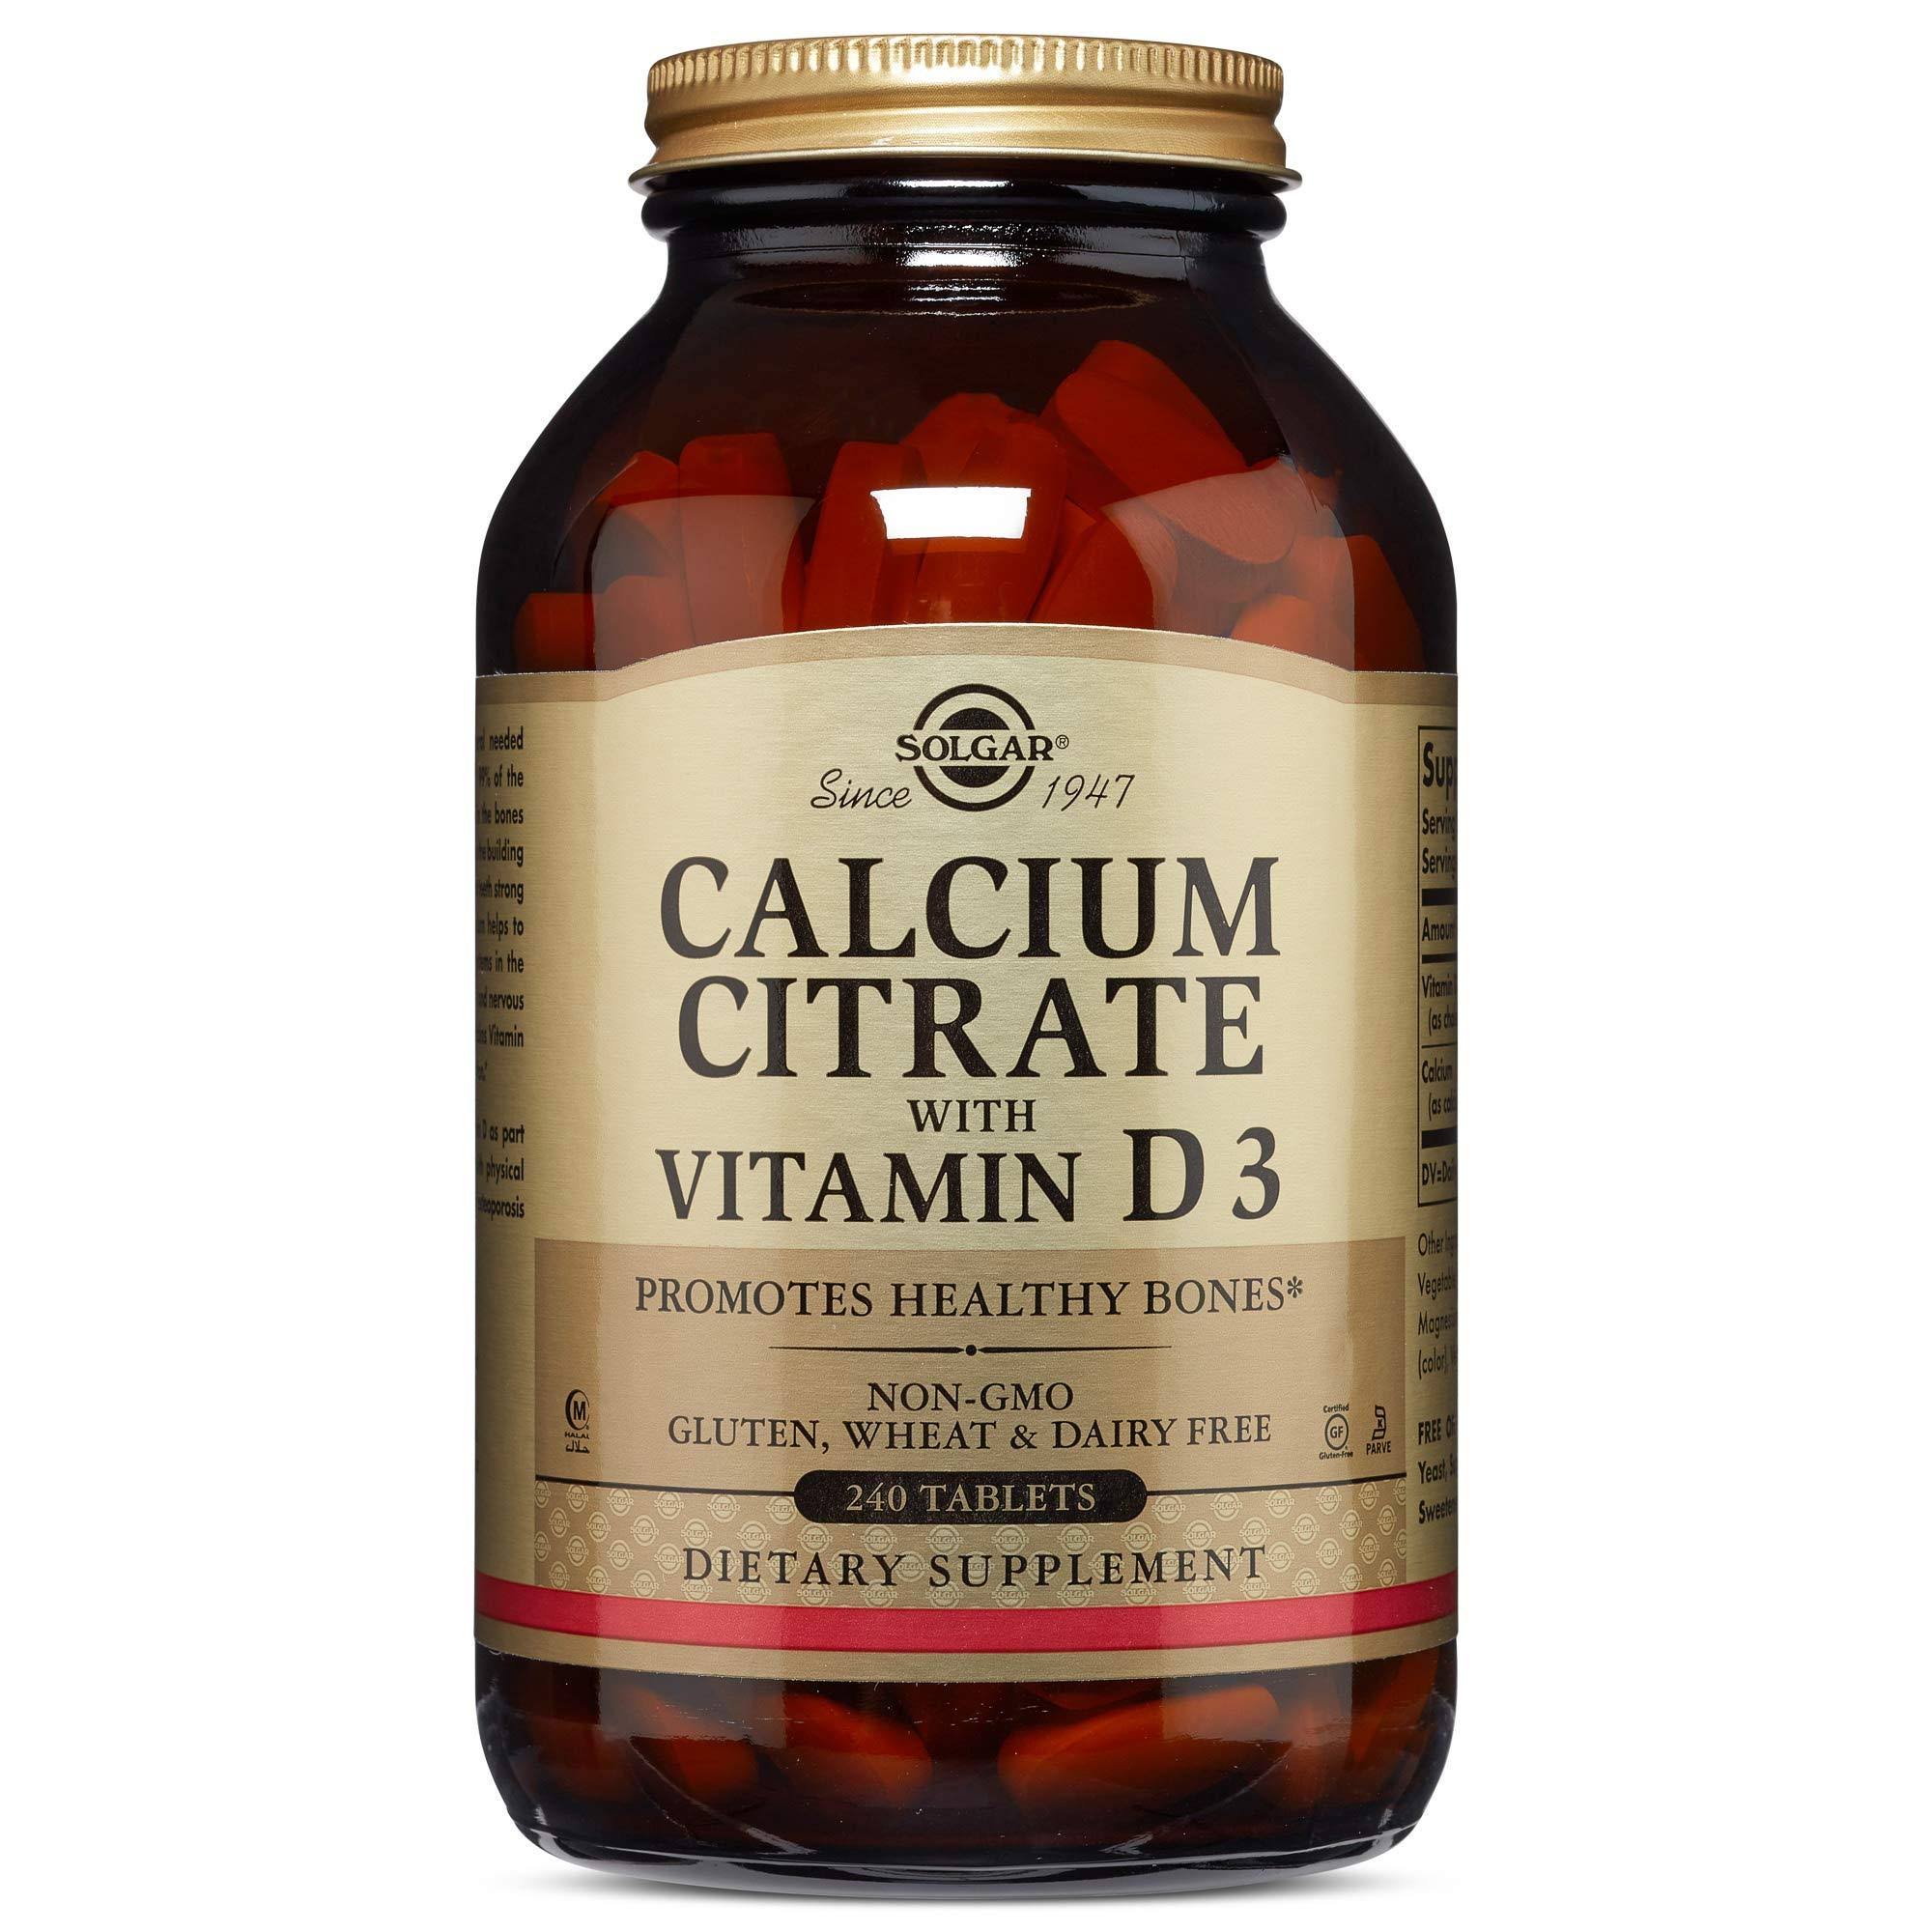 Solgar Calcium Citrate with Vitamin D3 Dietary Supplement - 240 Tablets